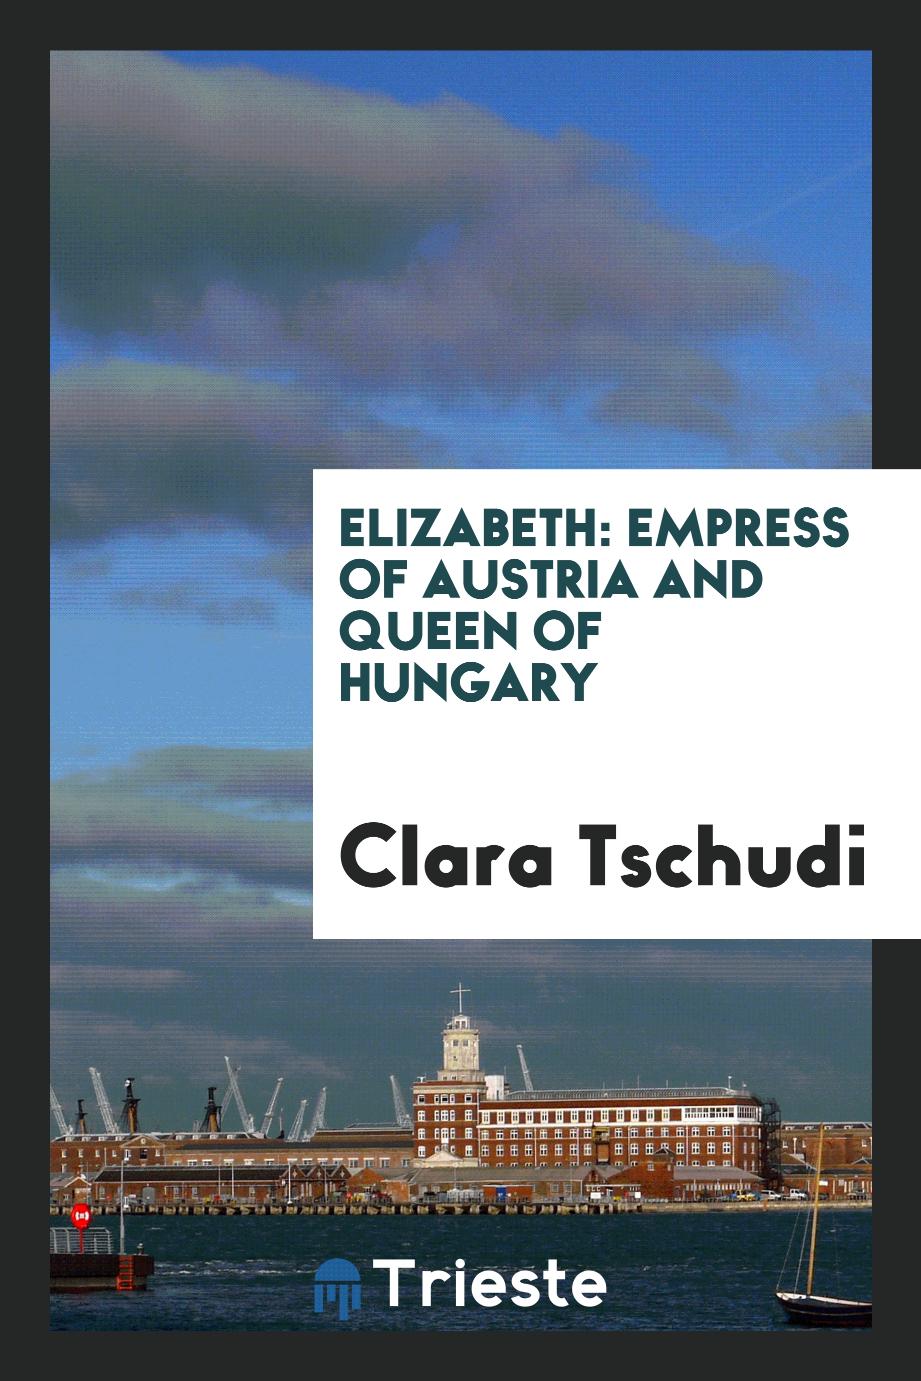 Elizabeth: empress of Austria and queen of Hungary